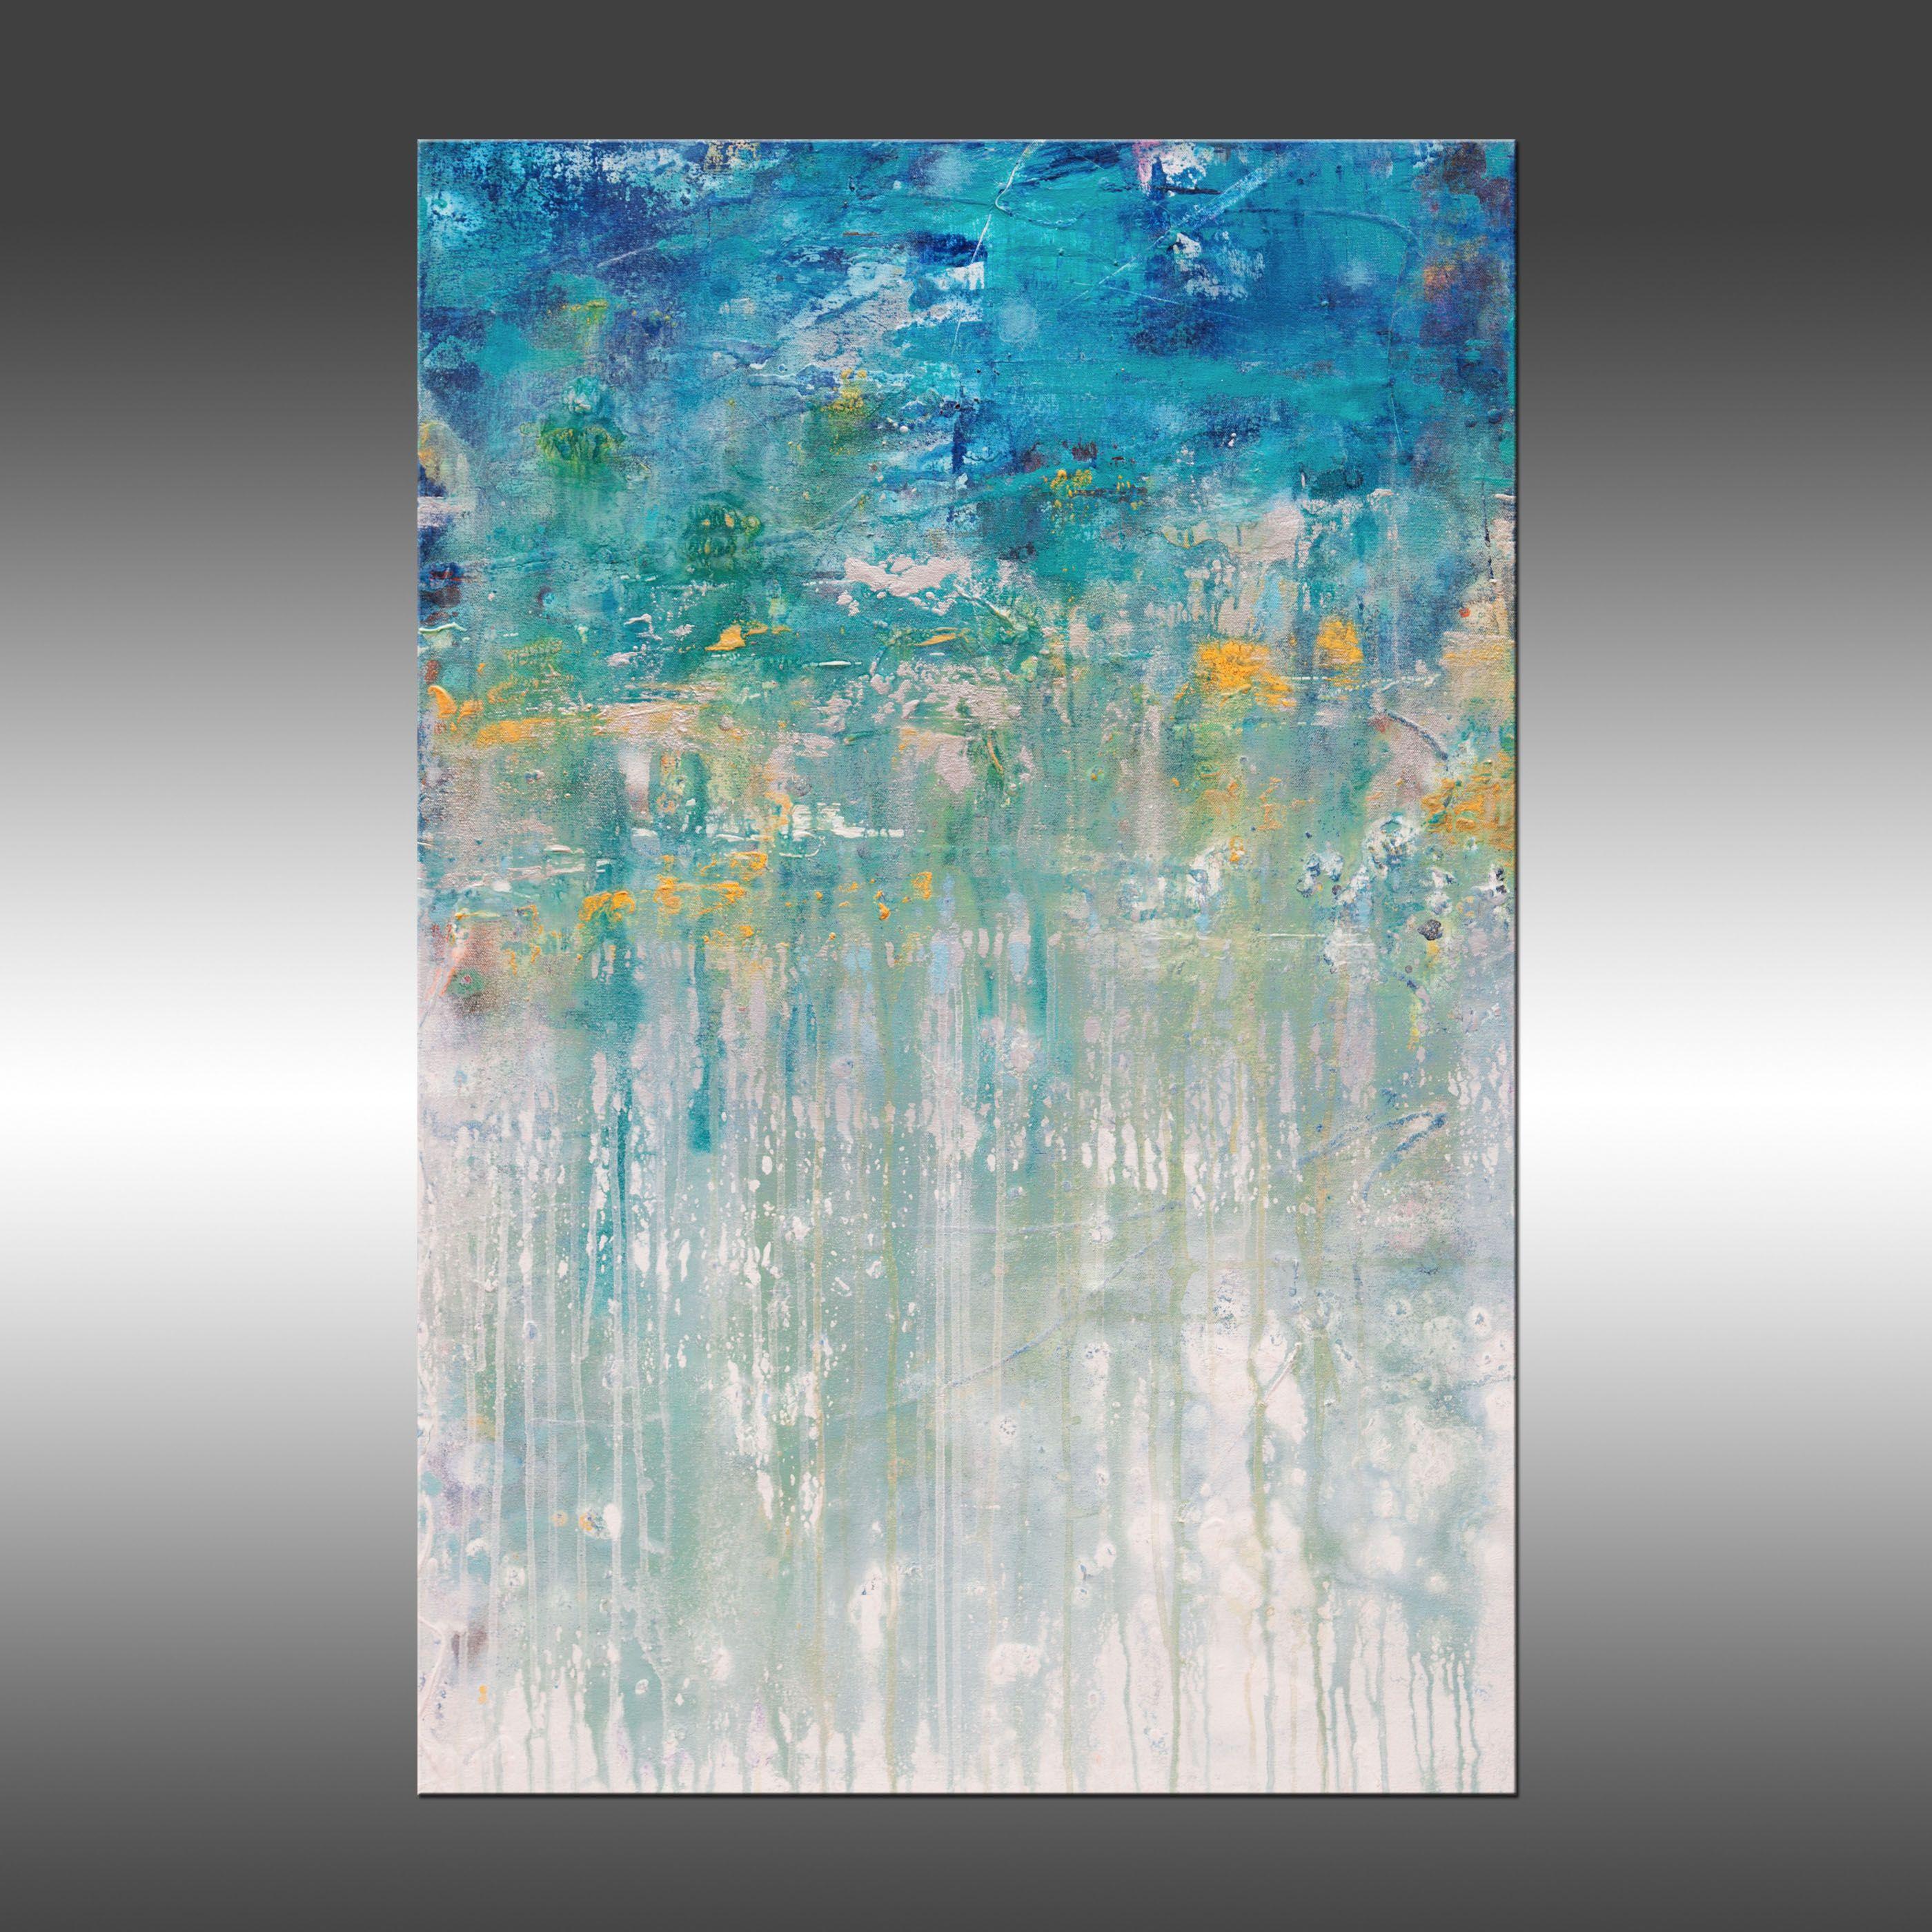 Asthenosphere 4 is an original painting, created with acrylic paint on gallery-wrapped canvas. It has a width of 36 inches and a height of 24 inches with a depth of 1.5 inches (36x24x1.5).     The colors used in the painting are white, blue, teal,